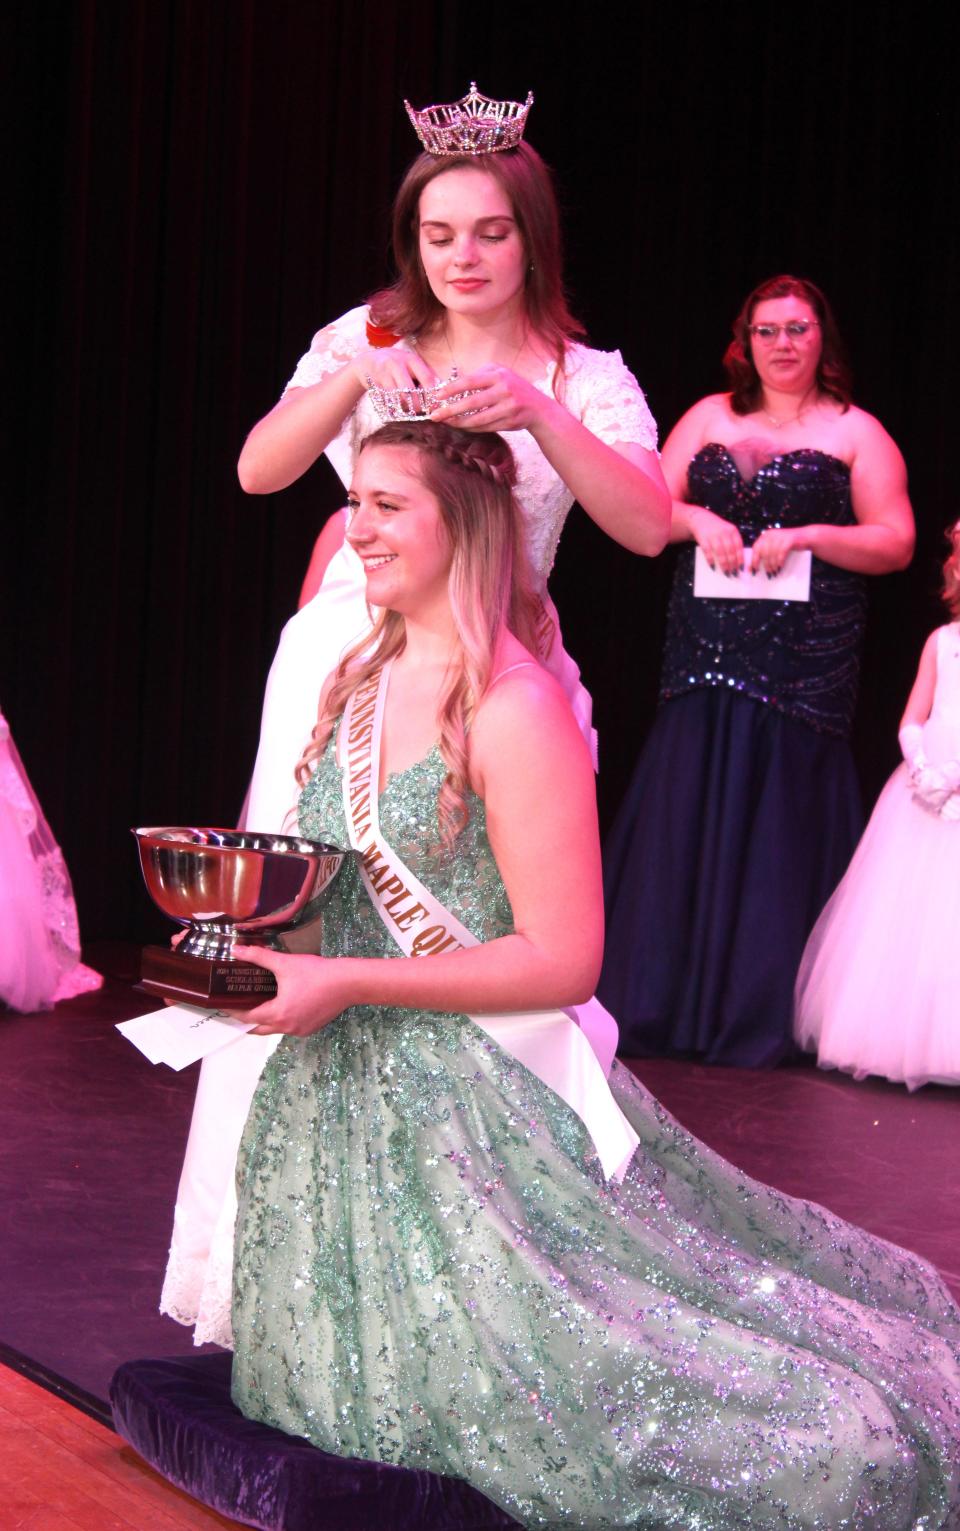 Gracie Paulman, 17, of Meyersdale was crowned Queen Maple LXXVII by last year's Queen Maple LXXVI Laura Boyce during the scholarship pageant at Meyersdale Area High School on Saturday evening.